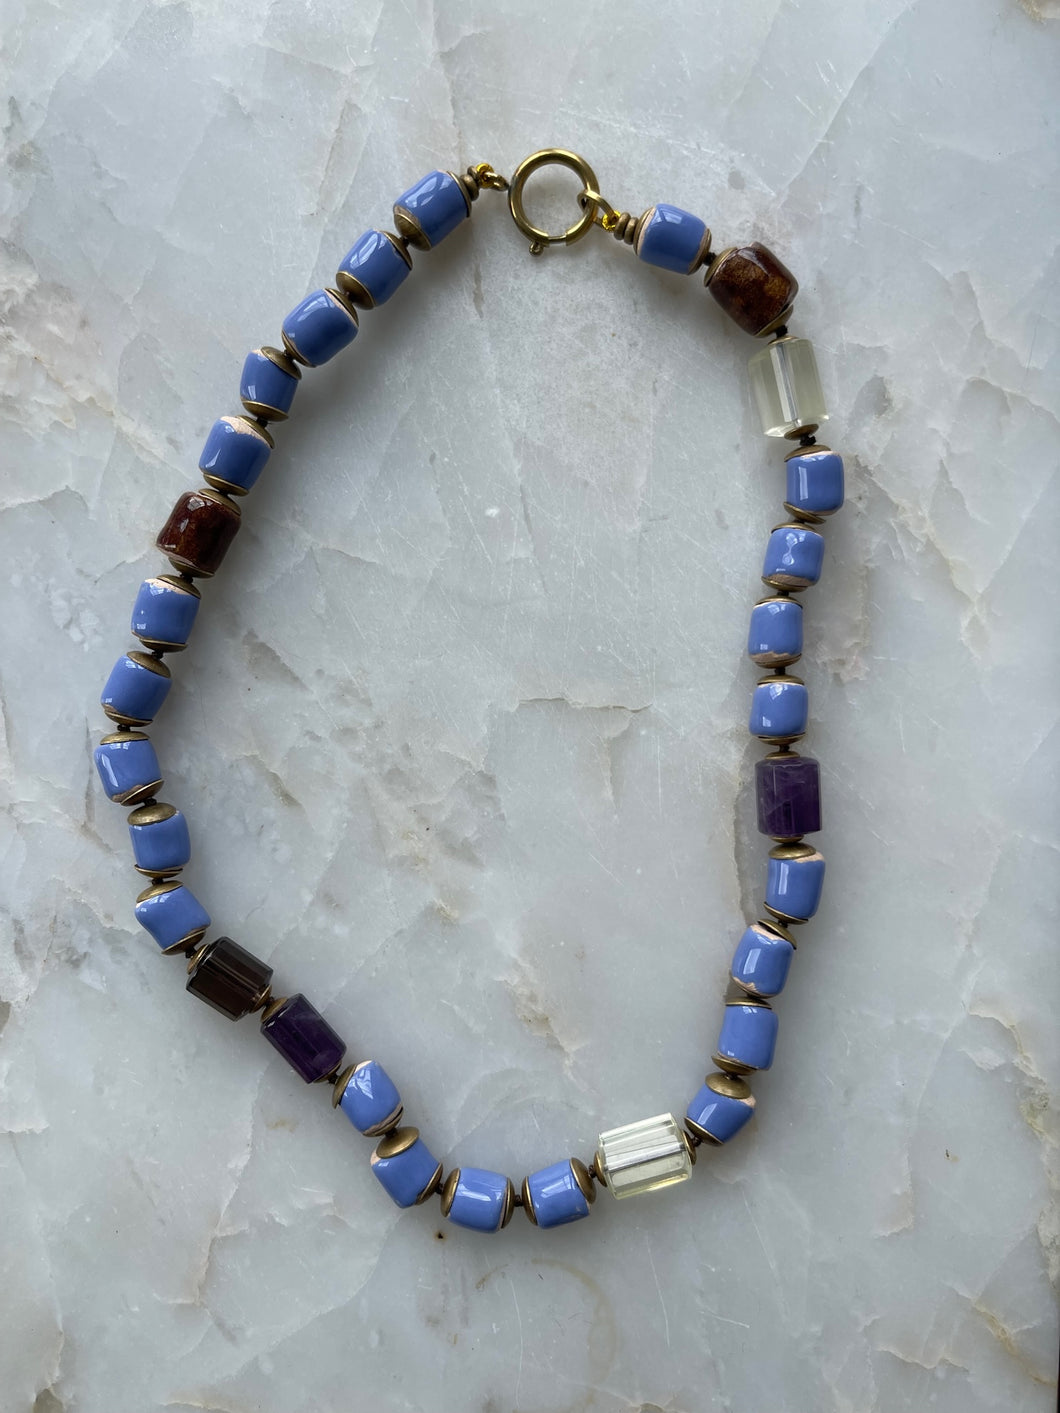 The Periwinkle Ceramic Candy & Crystal necklace